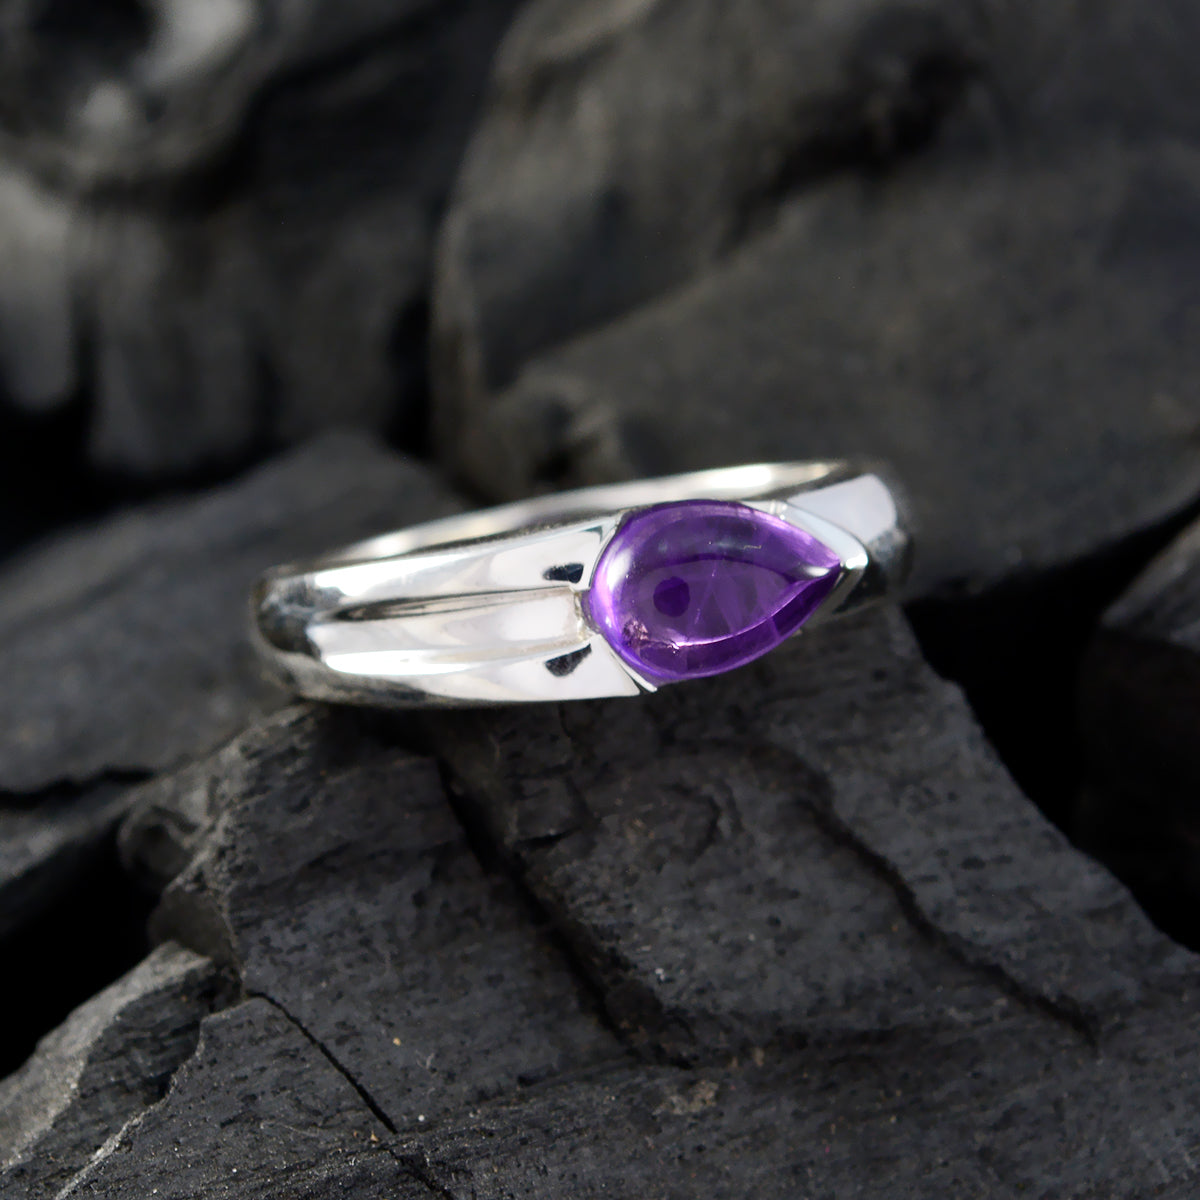 Well-Favoured Stone Amethyst 925 Silver Rings Gift For Mothers Day